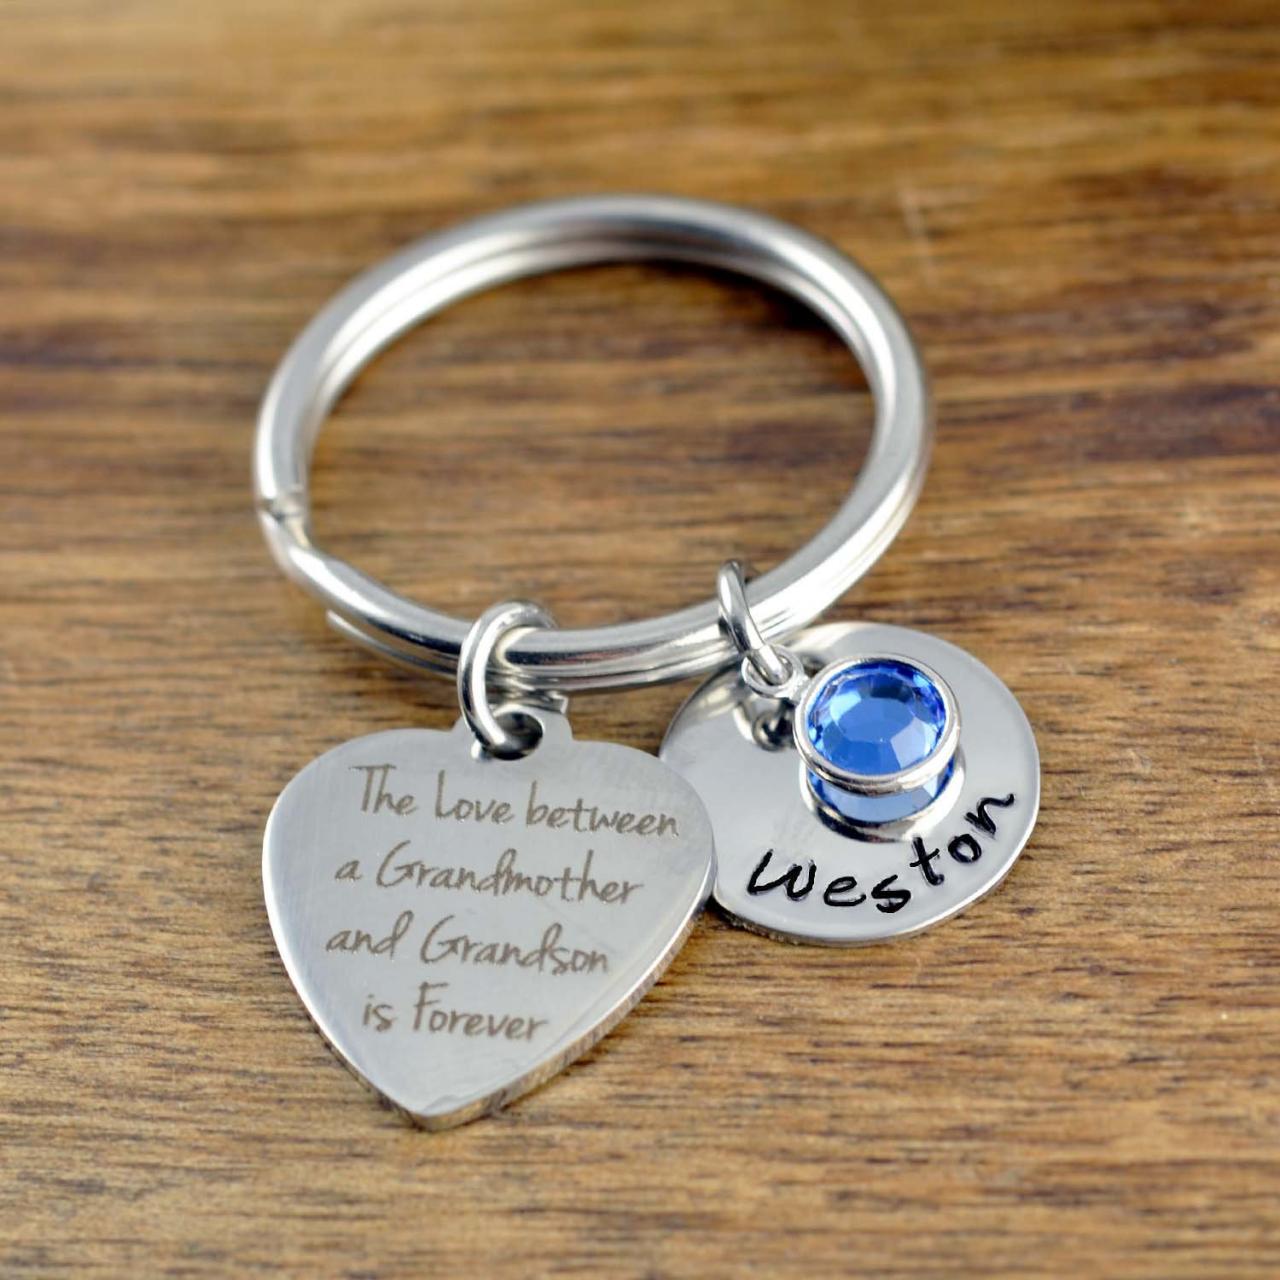 The Love Between A Grandmother And Grandson Is Forever Keychain, Gift For Grandmother, Gift For Grandma, Grandmother Gift, Grandma Gift